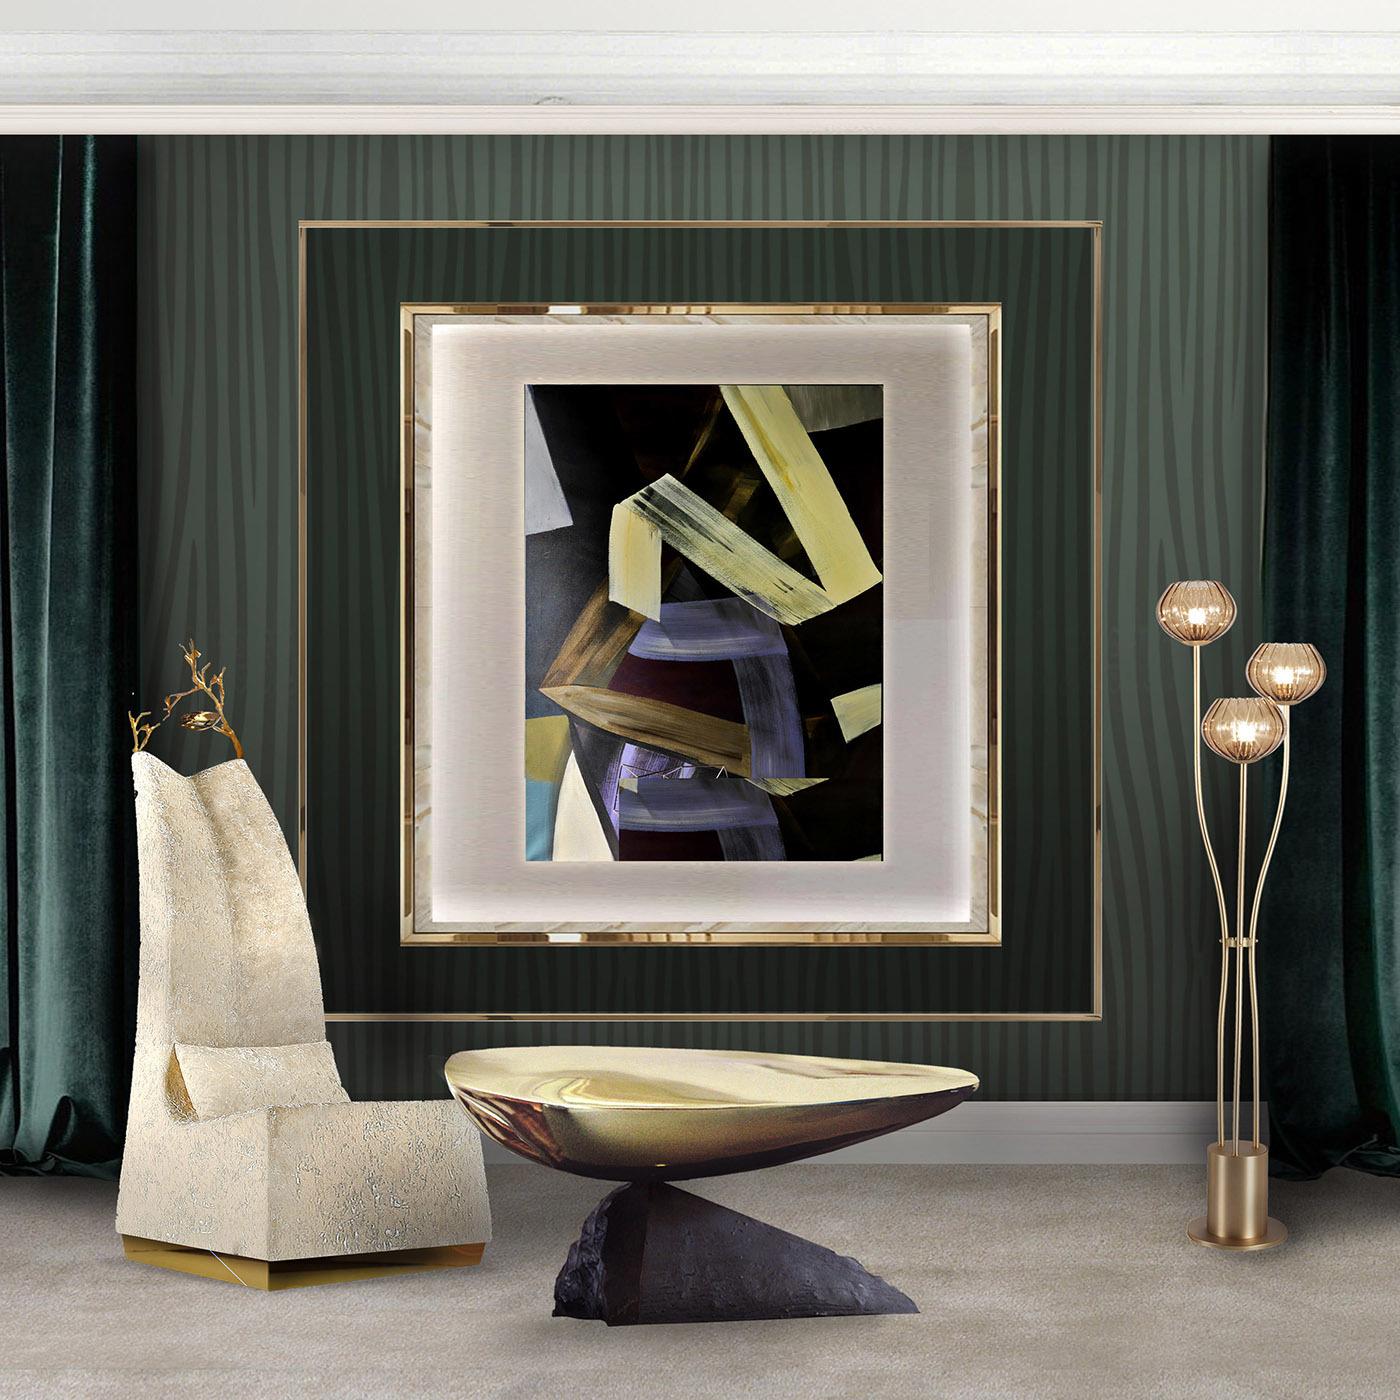 This bespoke coffee table by designer Livio Ballabio and artist Kyoji Nagatani will be sure to be a stunner. A triangular, dark bronze sculpture base serves supports a bright brass swivel top shaped almost like a half-kernel and with a glossy